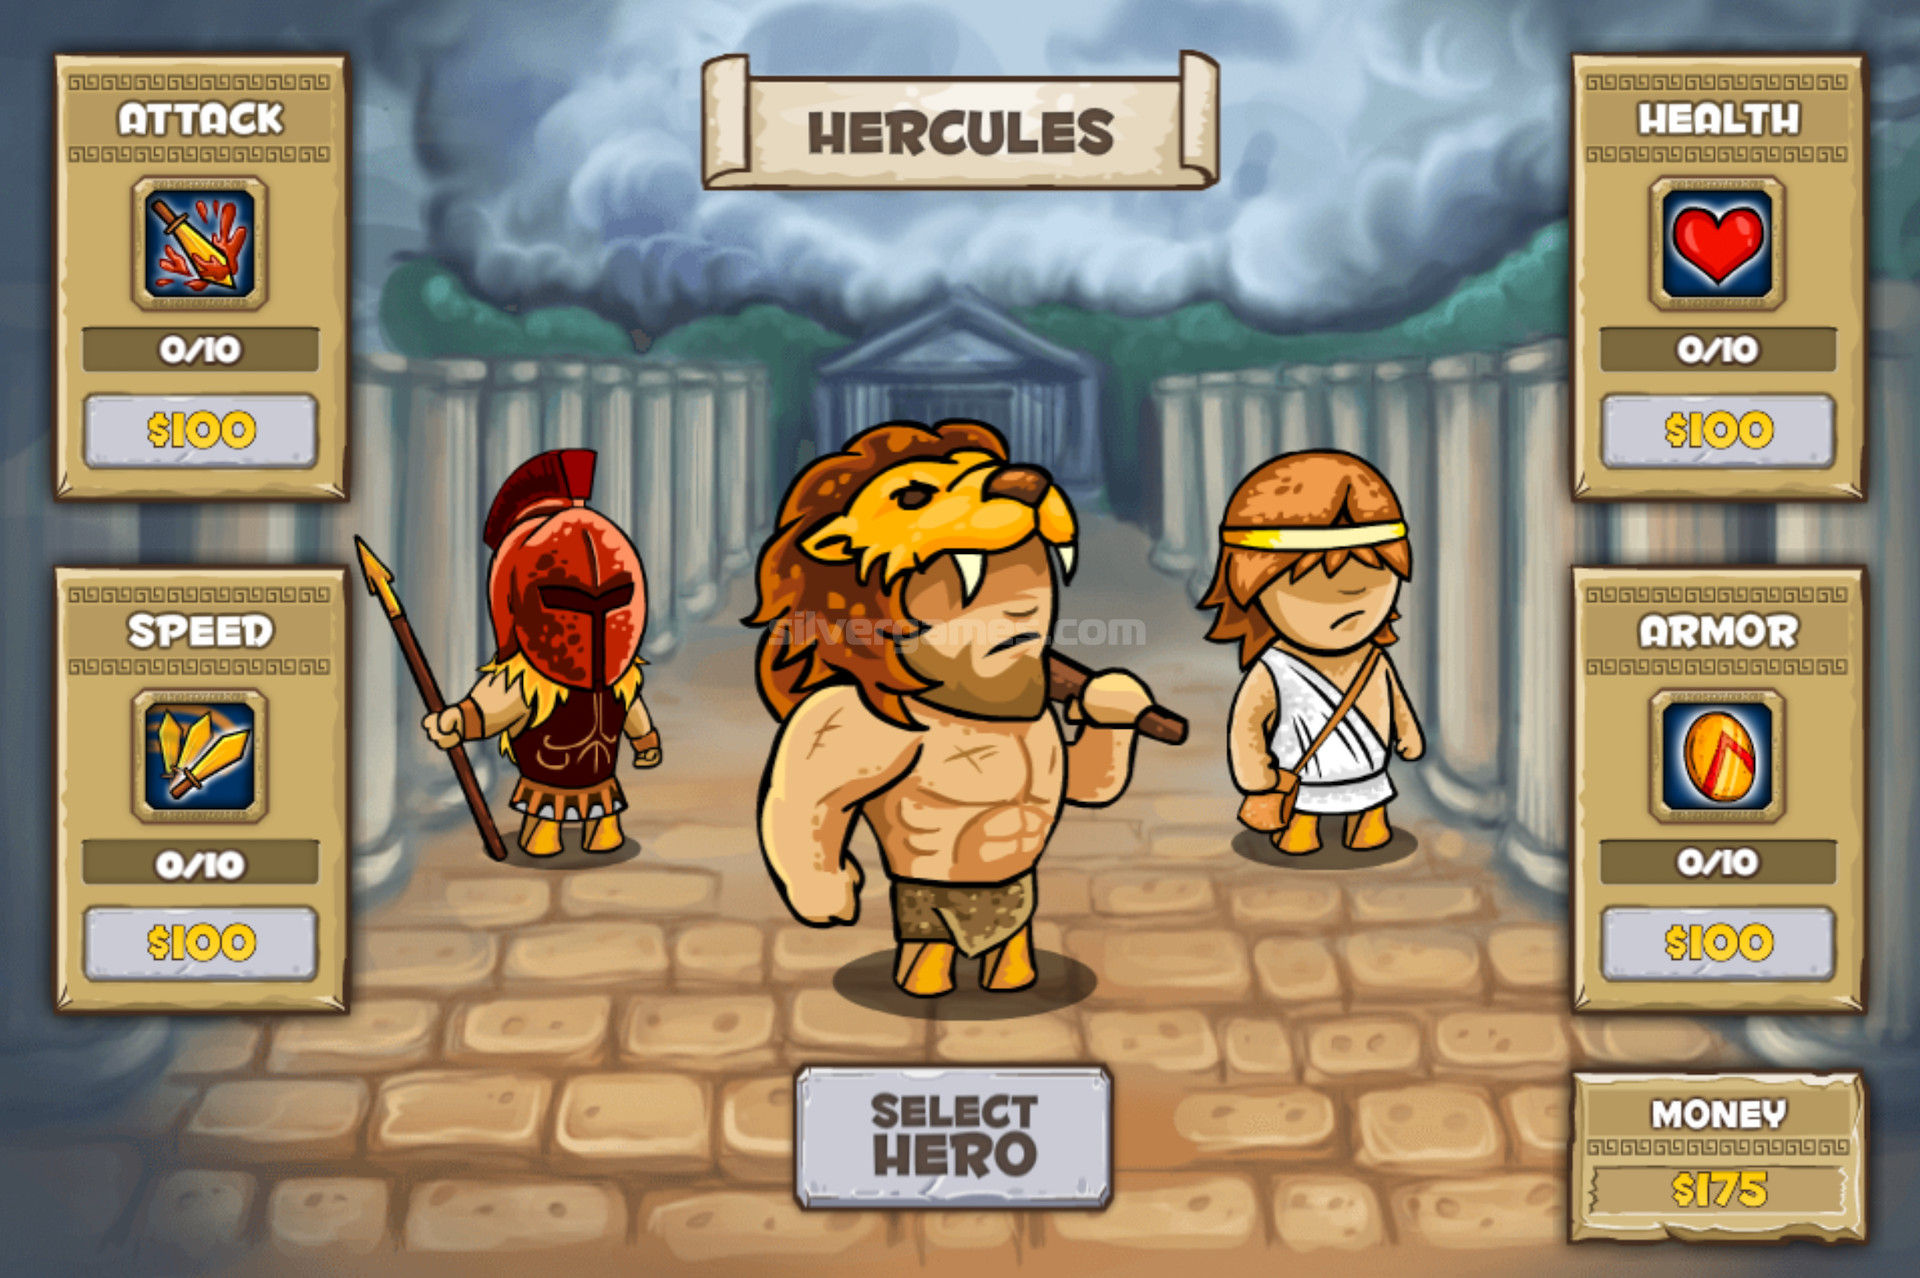 Clicker Heroes - Play Online on SilverGames 🕹️